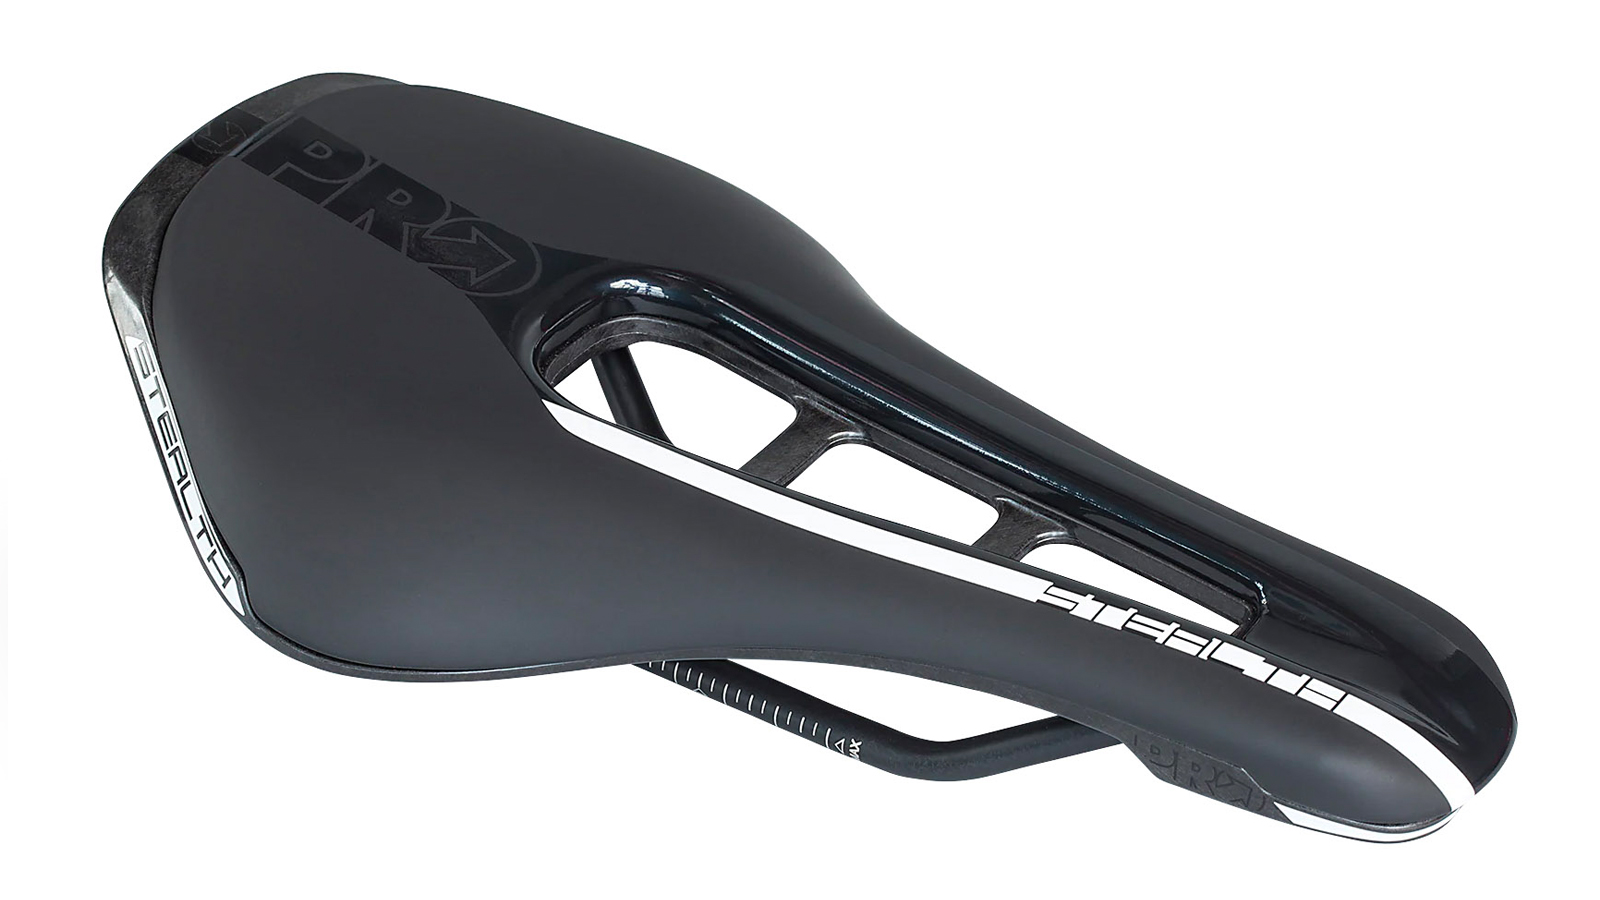 Best Road Bike Saddles Our Top Road Saddle Picks And Guide On How To Choose Cyclingnews 